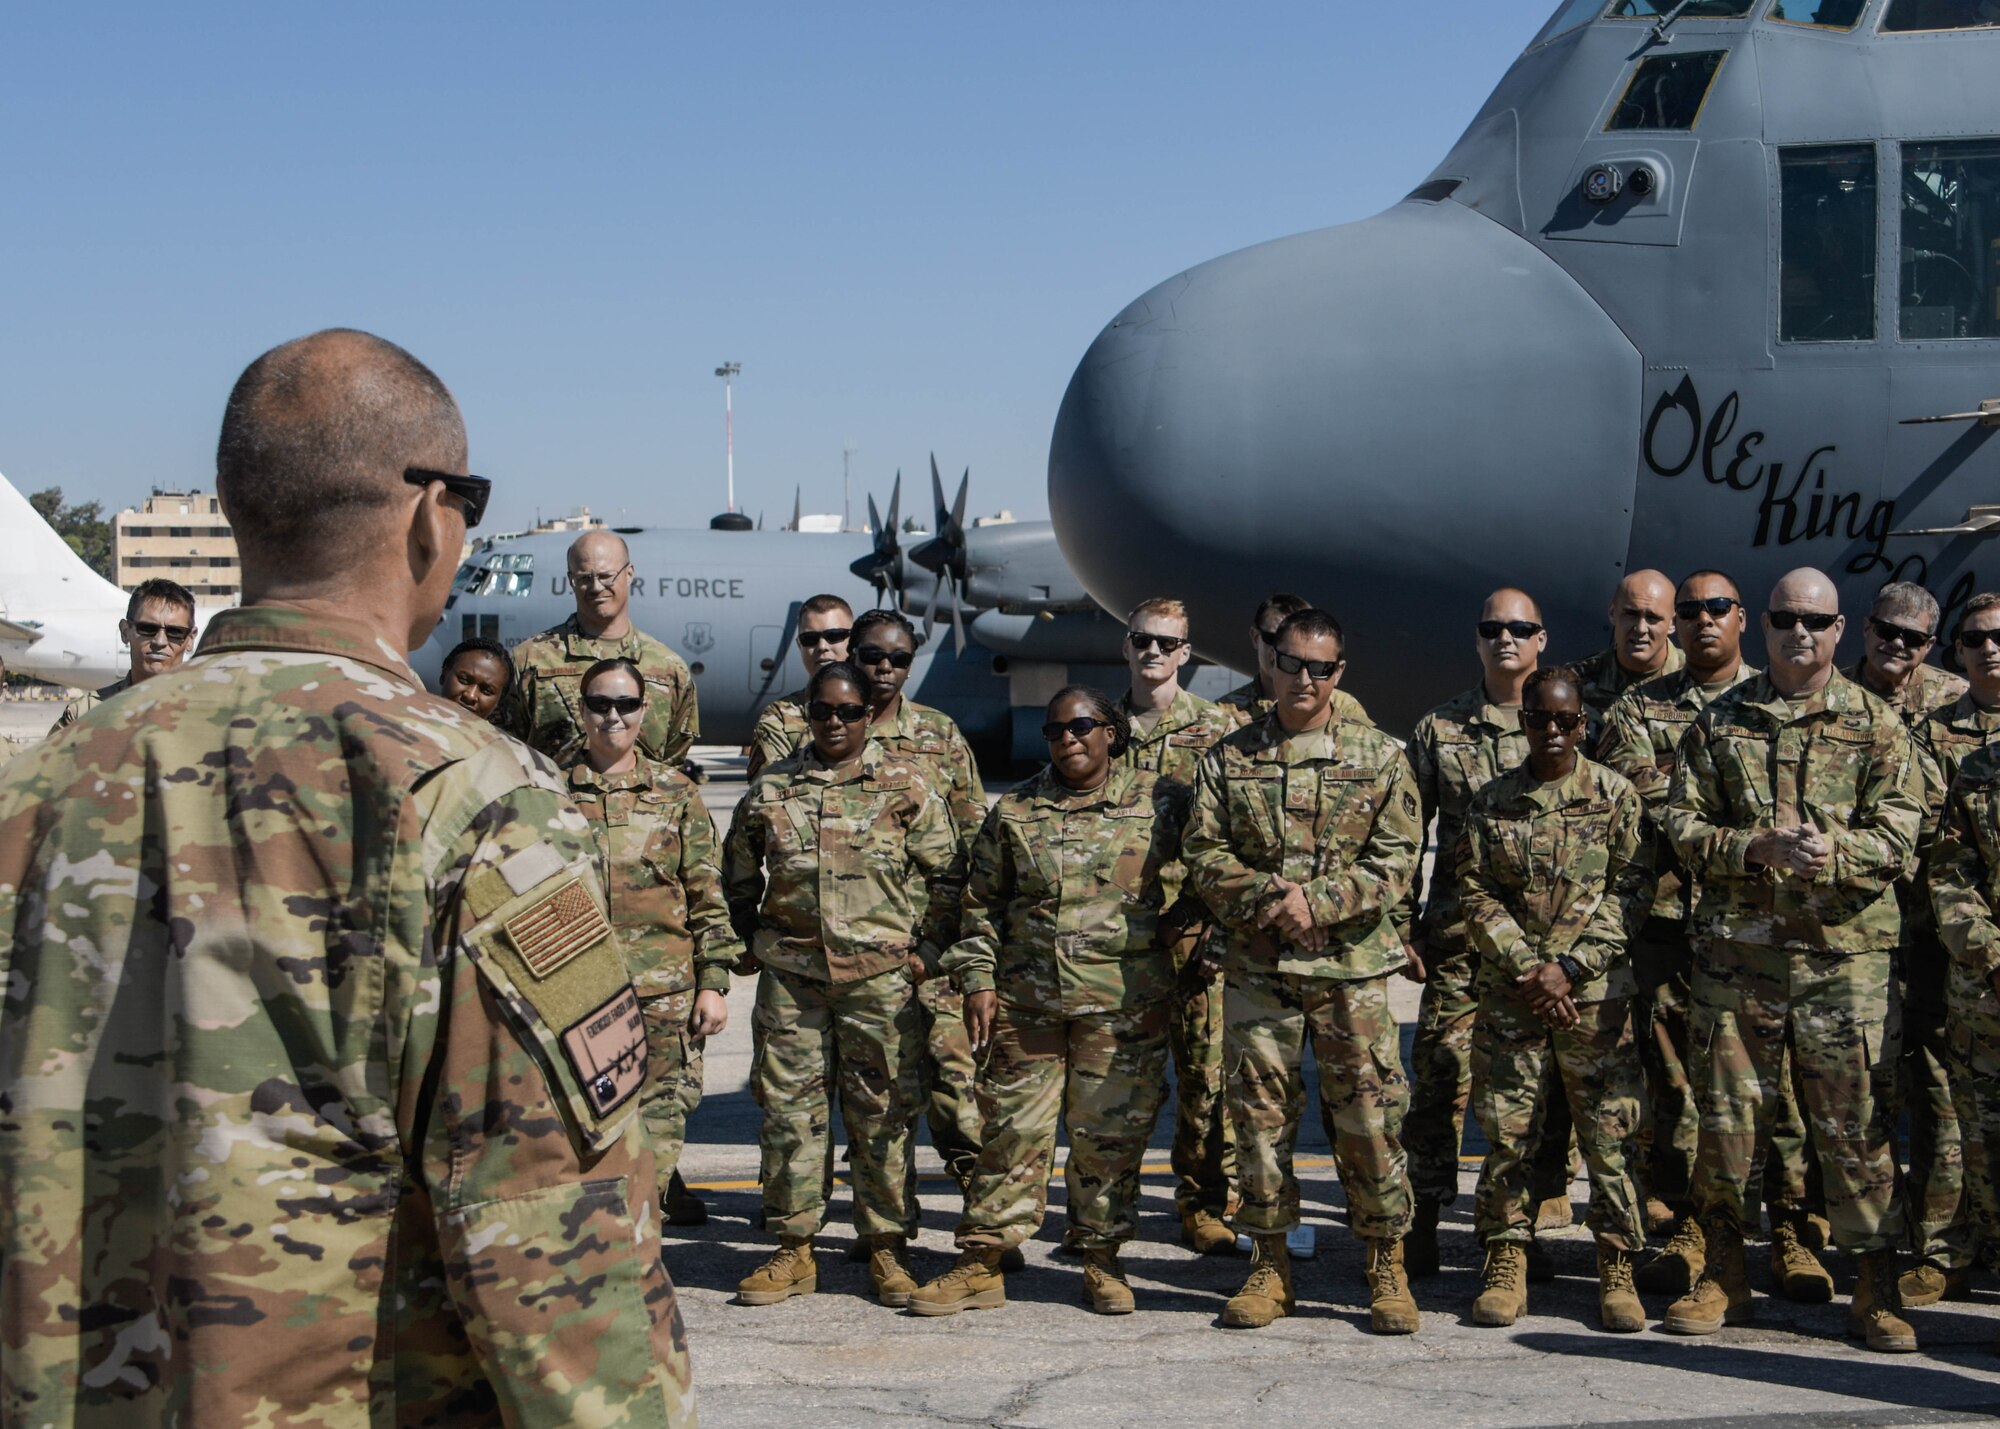 Chief Master Sgt. Marvin Jones speaks to Airmen from Dobbins Air Reserve Base participating in Exercise Eager Lion in Jordan after receiving a signed photograph on Sept. 6, 2019. Eager Lion is a multi-national exercise where Dobbins Air Reserve Base is the primary provider of air support. (U.S. Air Force photo by Senior Airman Josh Kincaid)